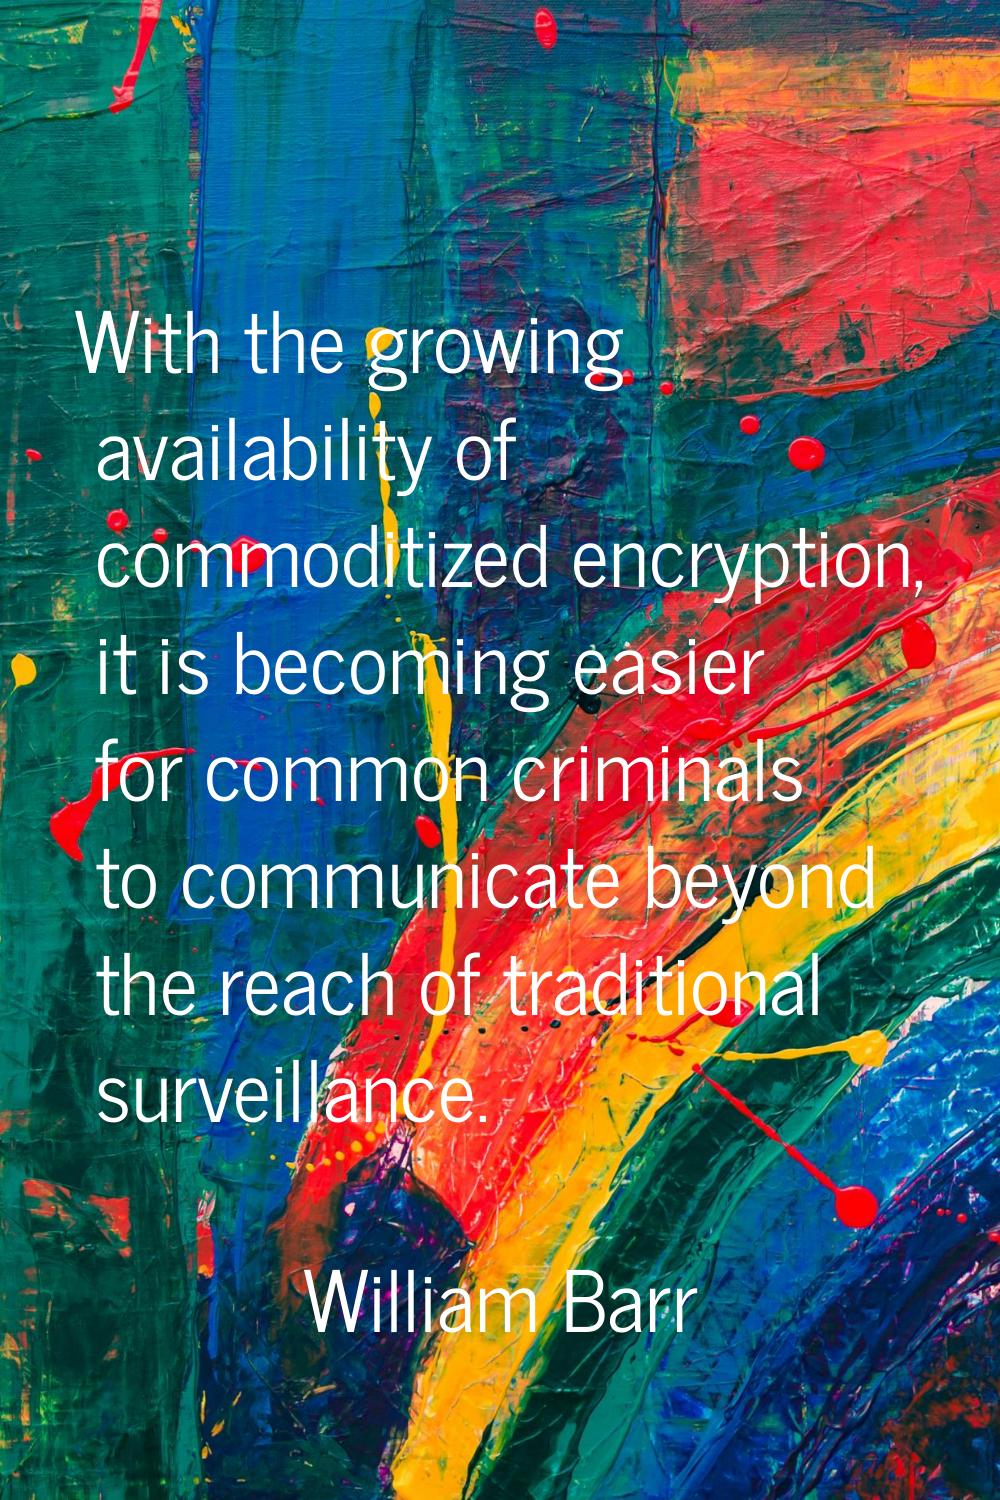 With the growing availability of commoditized encryption, it is becoming easier for common criminal